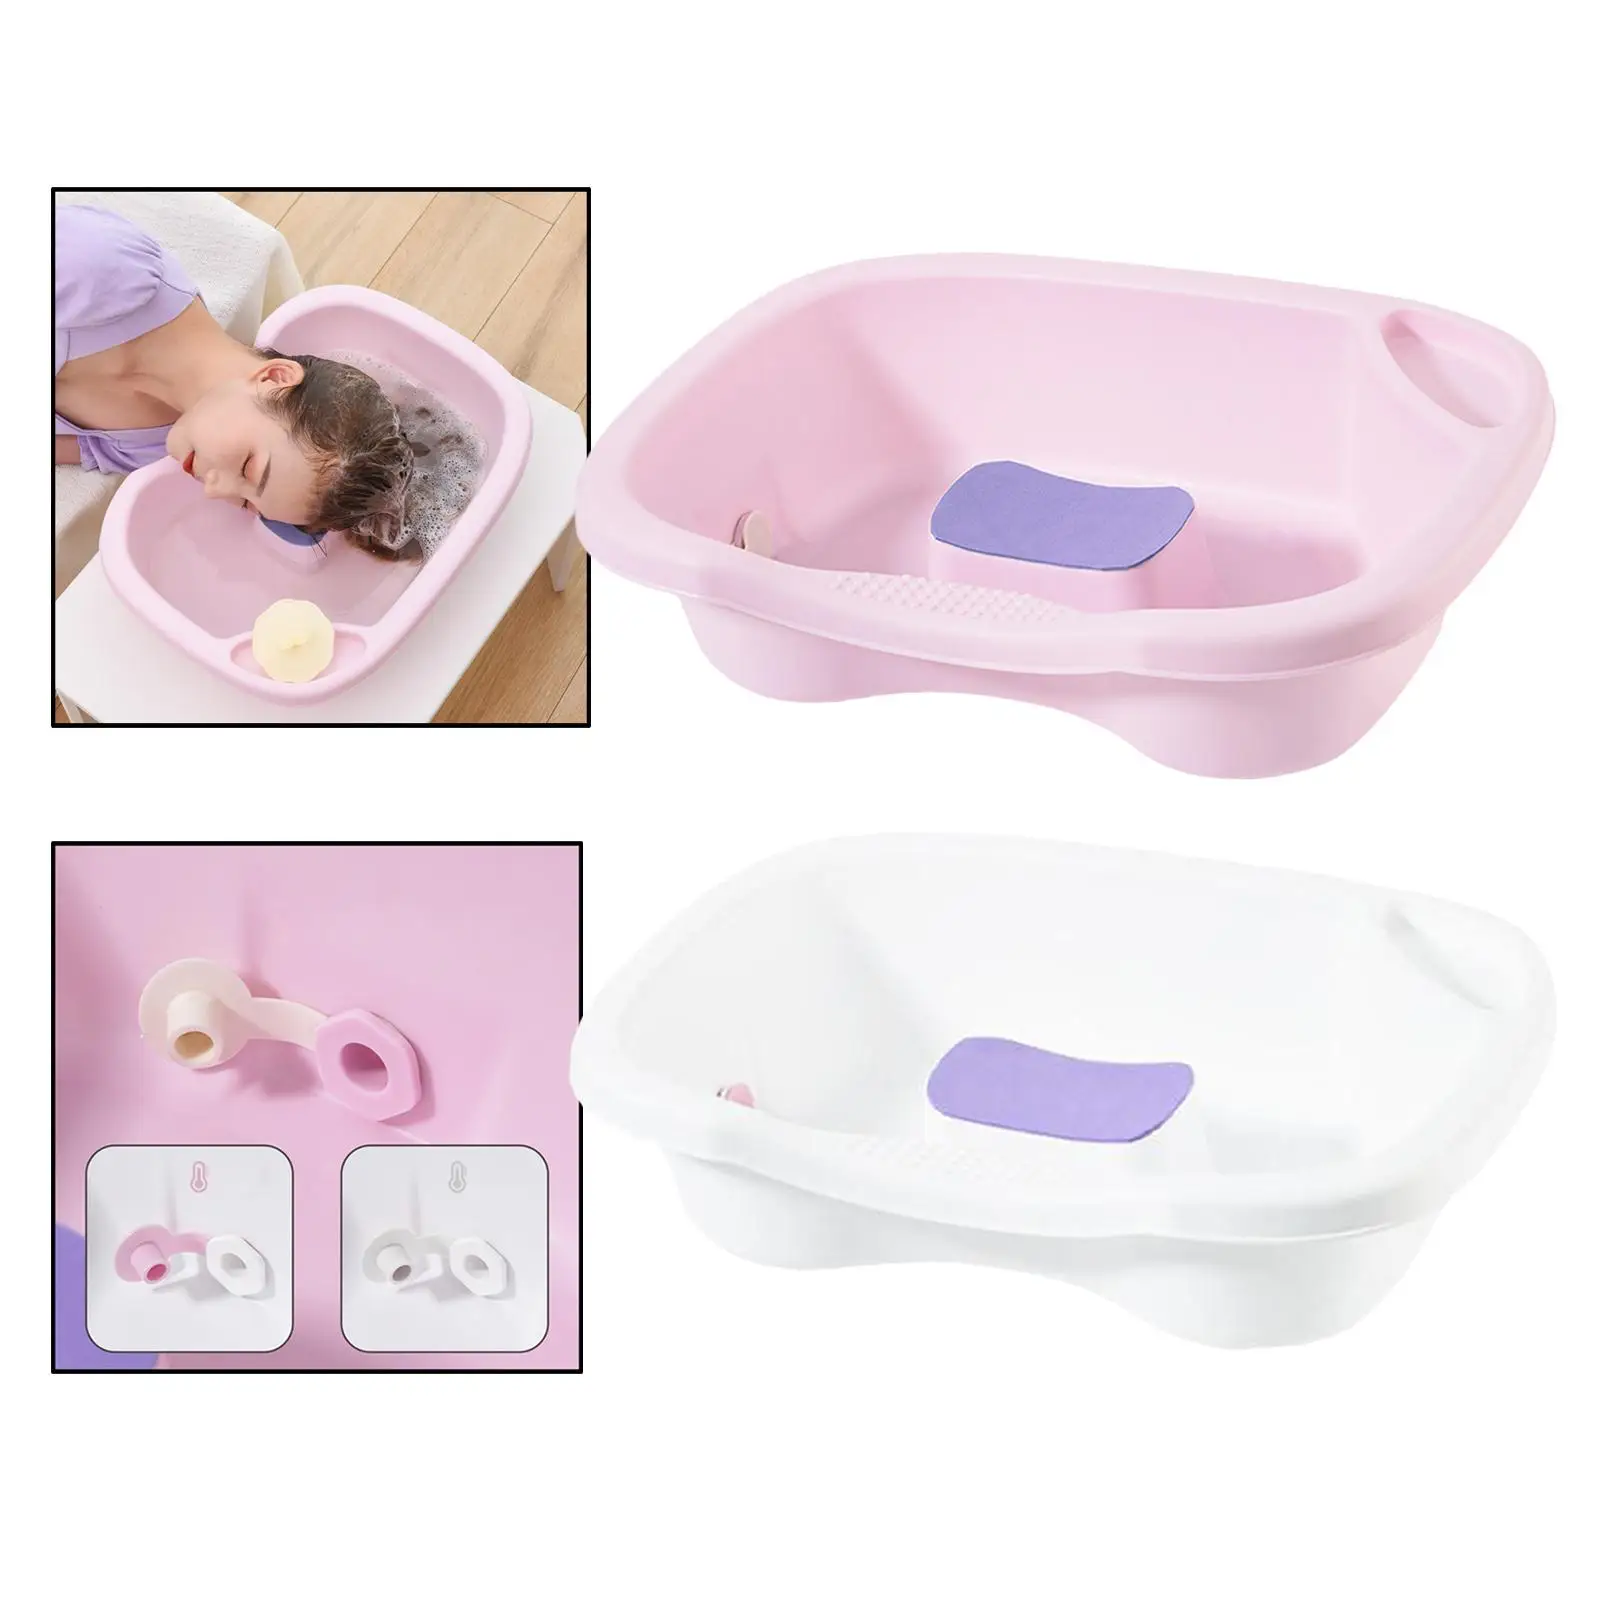 Bedside Shampoo Basins with Tube Hair Washing Sink Neck Rest Mobile Shower for Hair Washing Barber Shop SPA Pregnant Patient